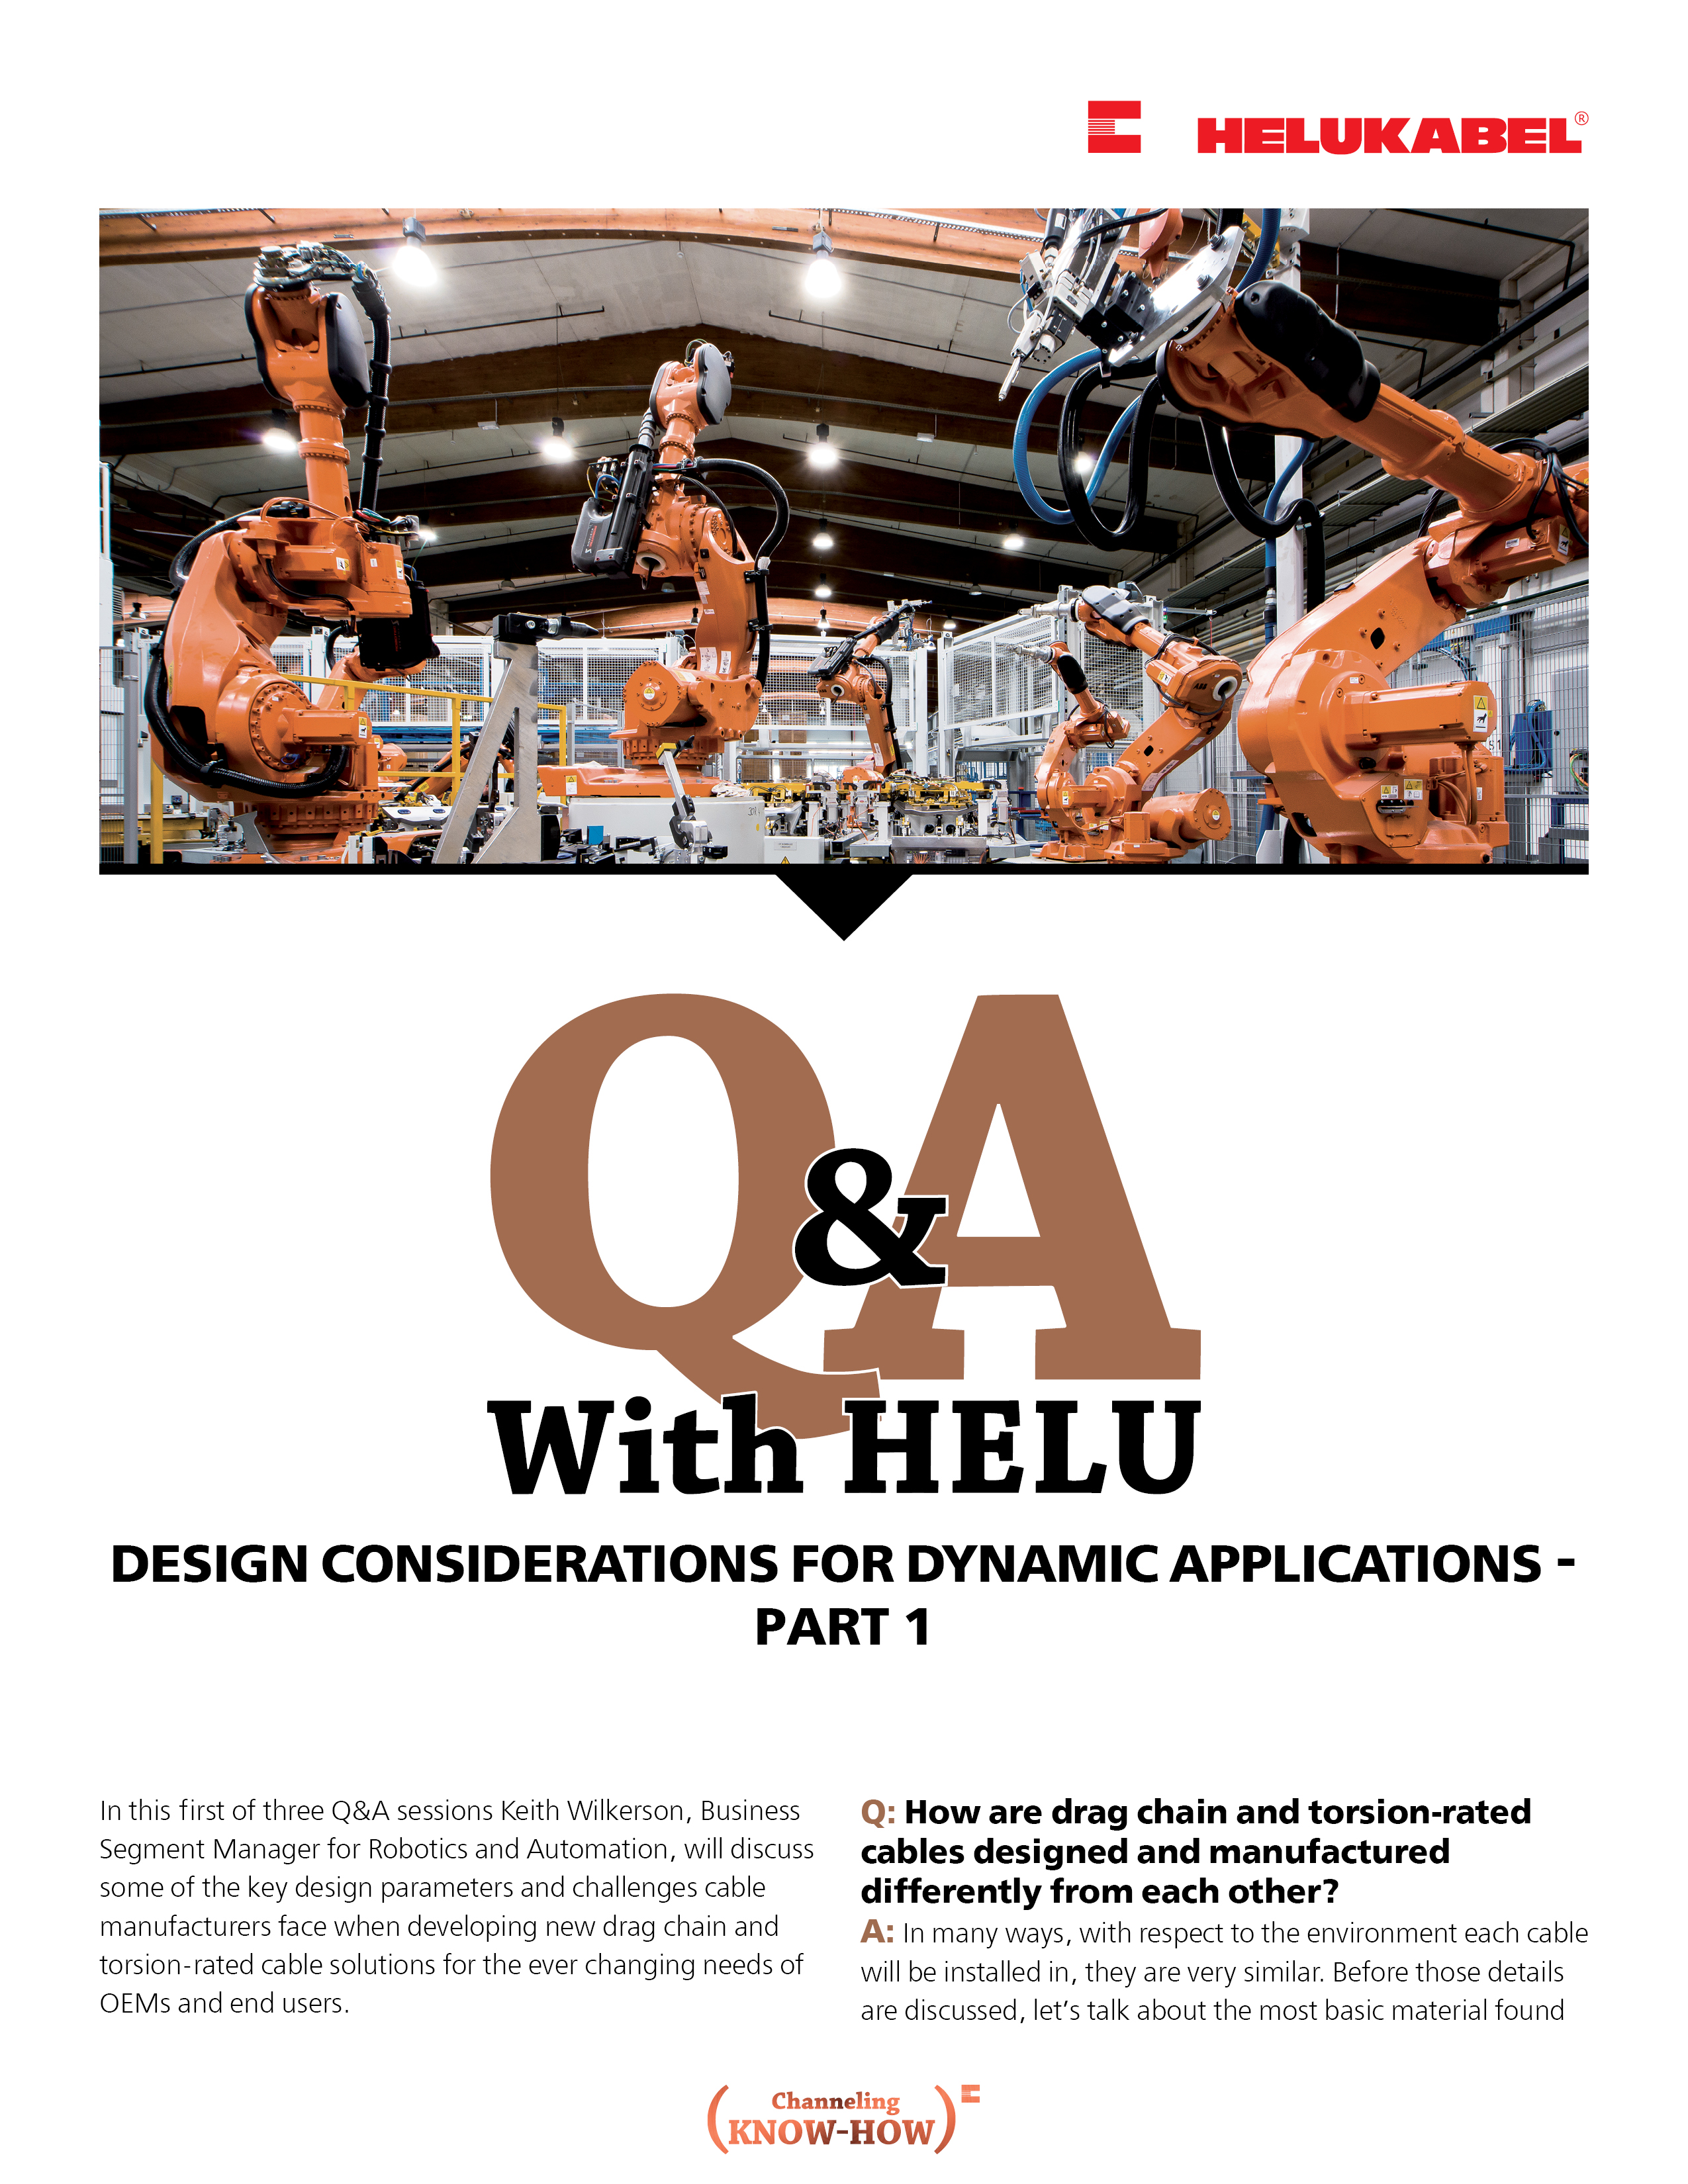 Q&A With HELU: Drag Chain & Torsion-rated Cables